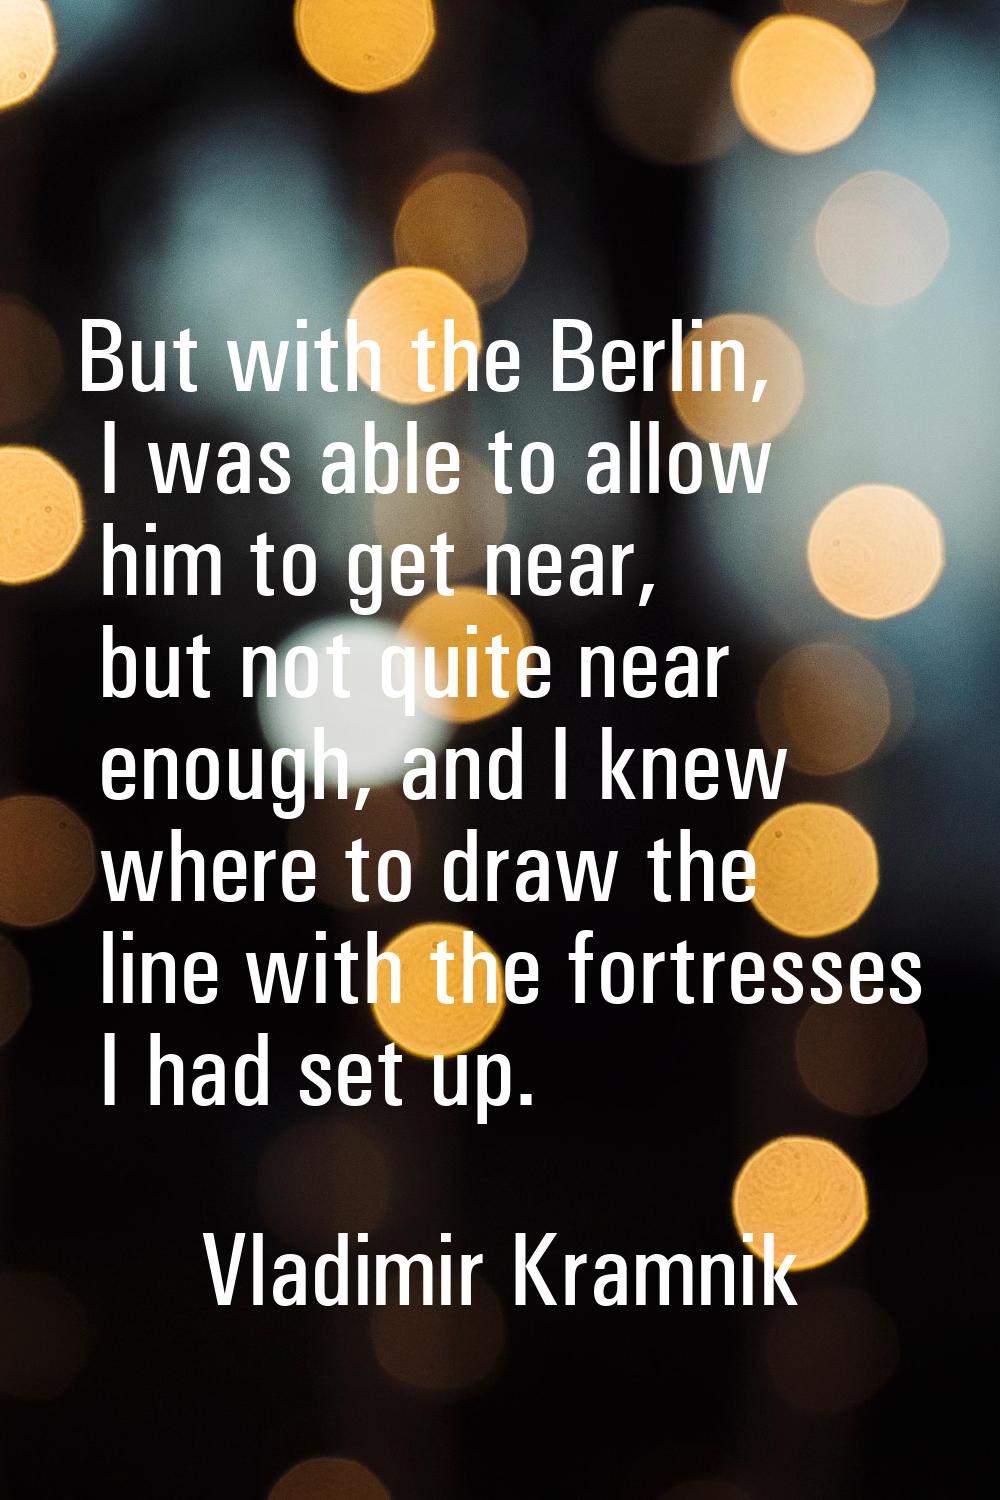 But with the Berlin, I was able to allow him to get near, but not quite near enough, and I knew whe